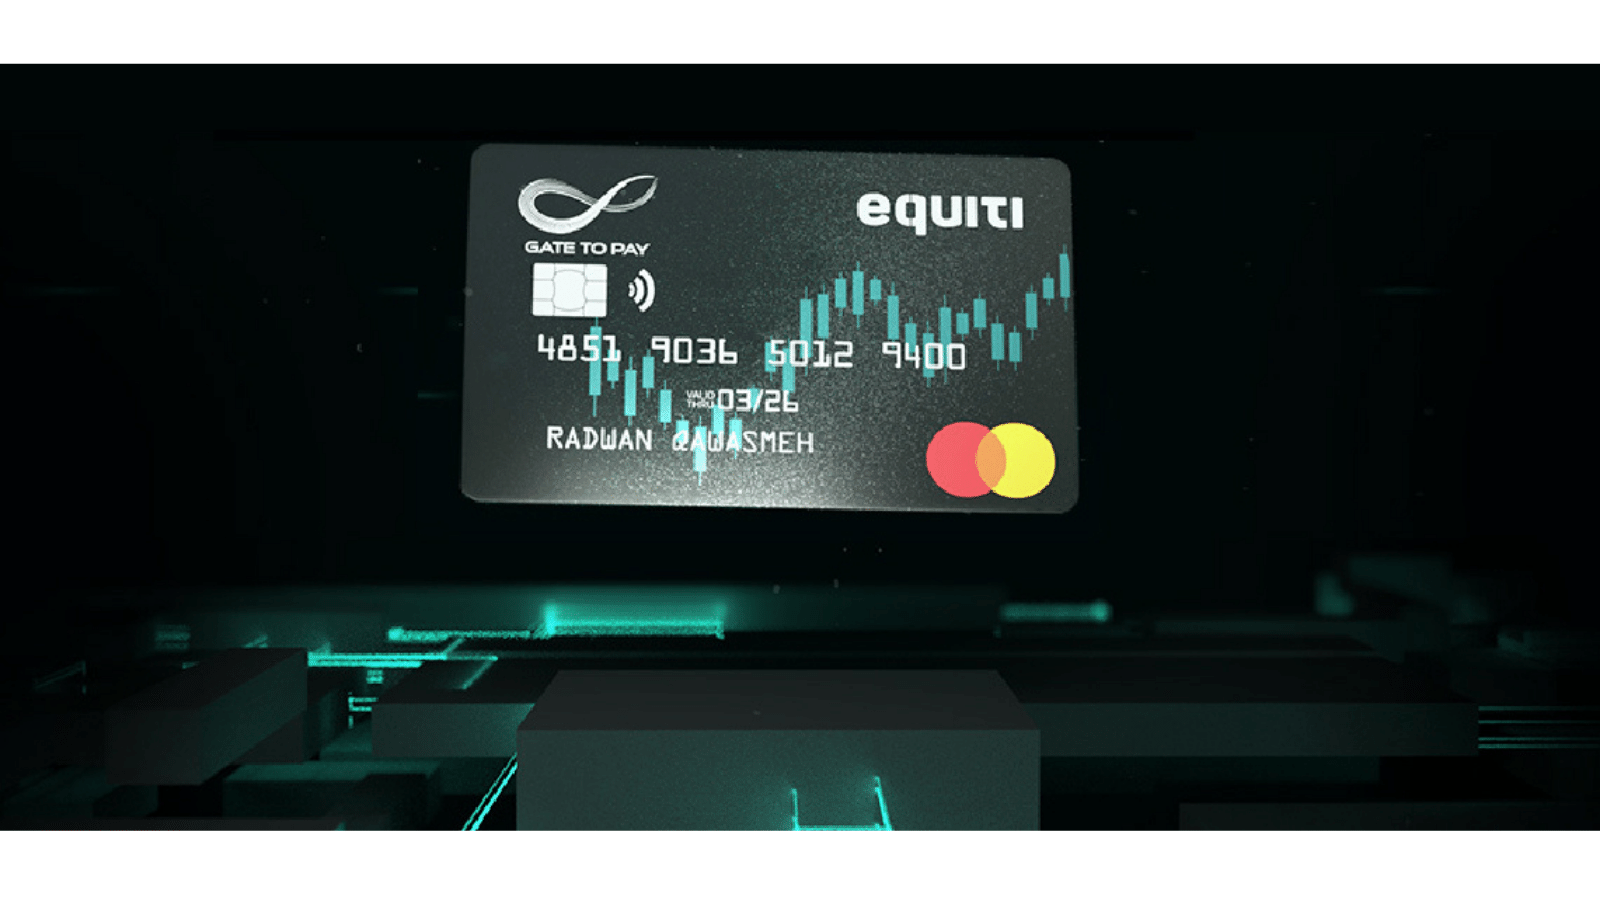 Equiti introduces fully integrated Mastercard payment card and mobile app in industry first